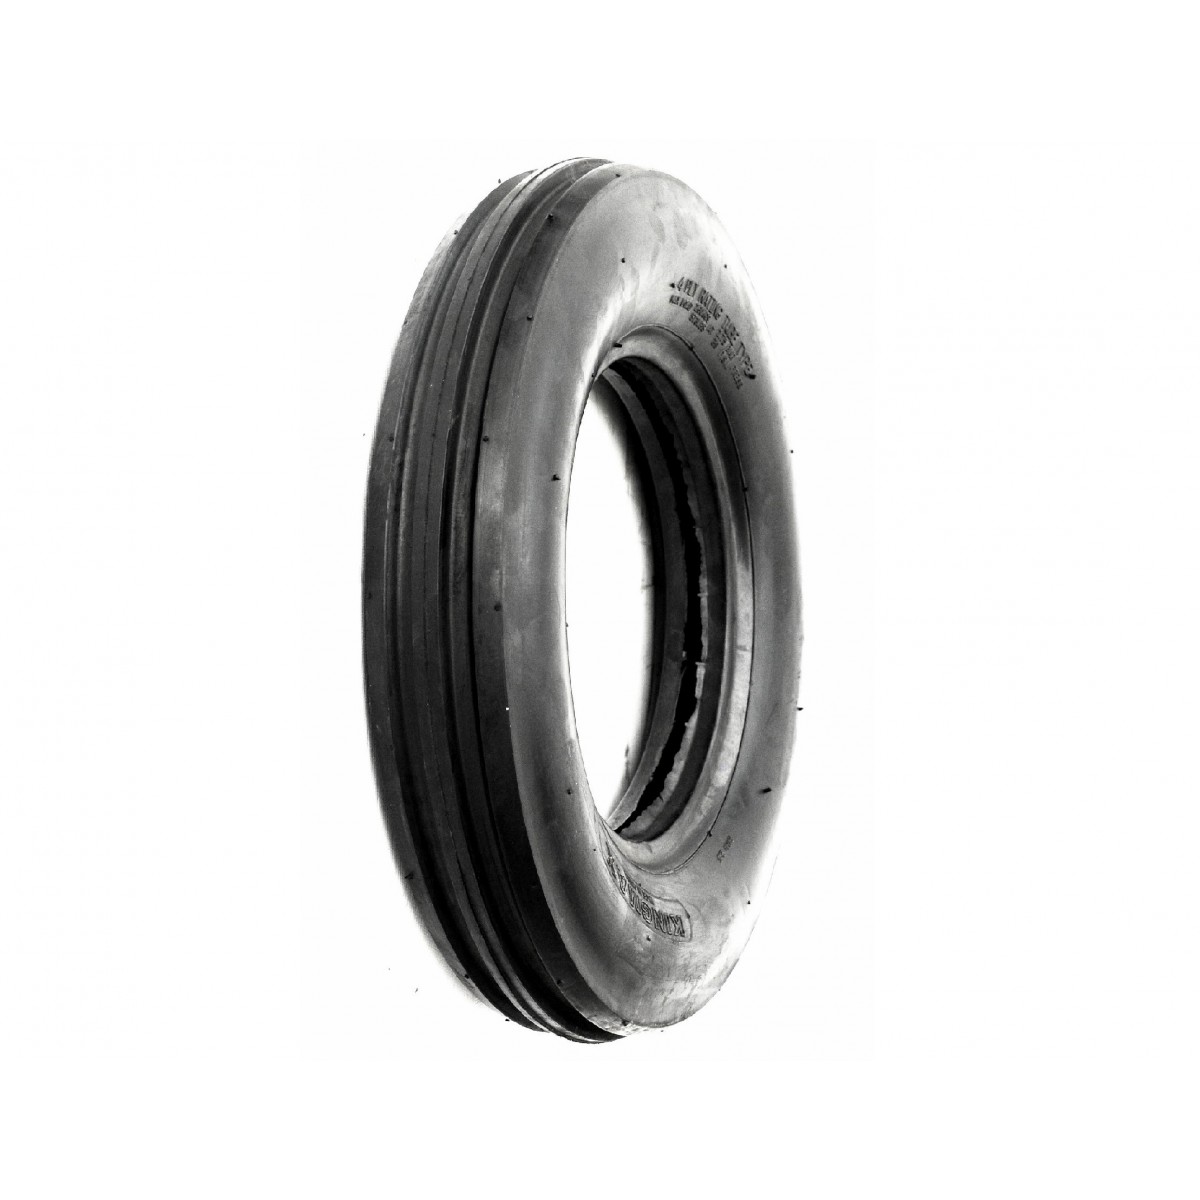 Agricultural tire 4.00-12 6PR 4-12 4x12 SMOOTH